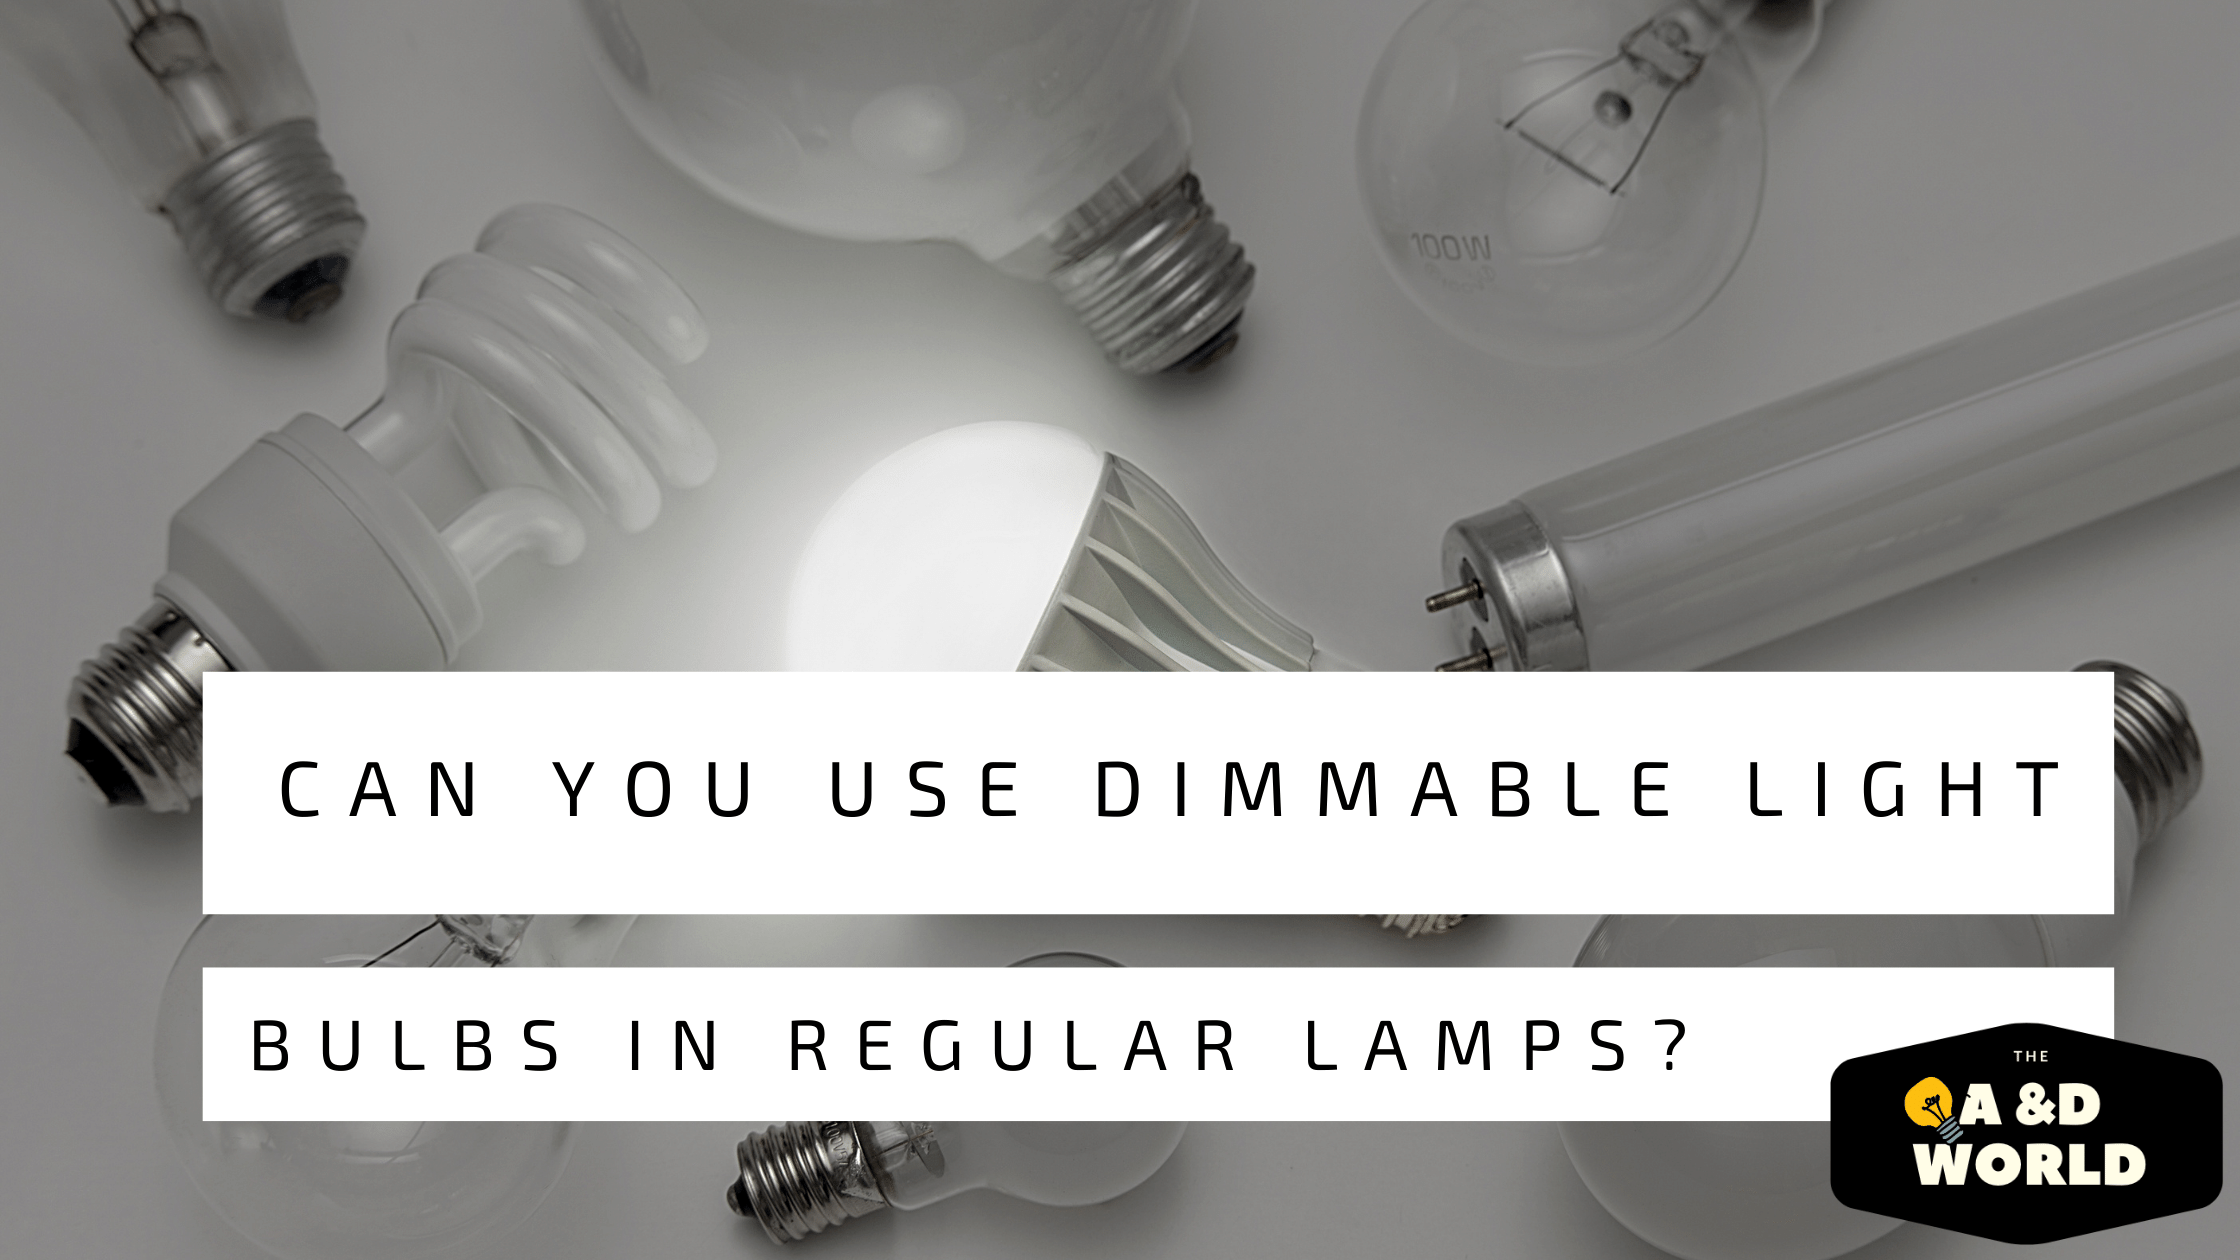 Can You Use Dimmable Light Bulbs In Regular Lamps?